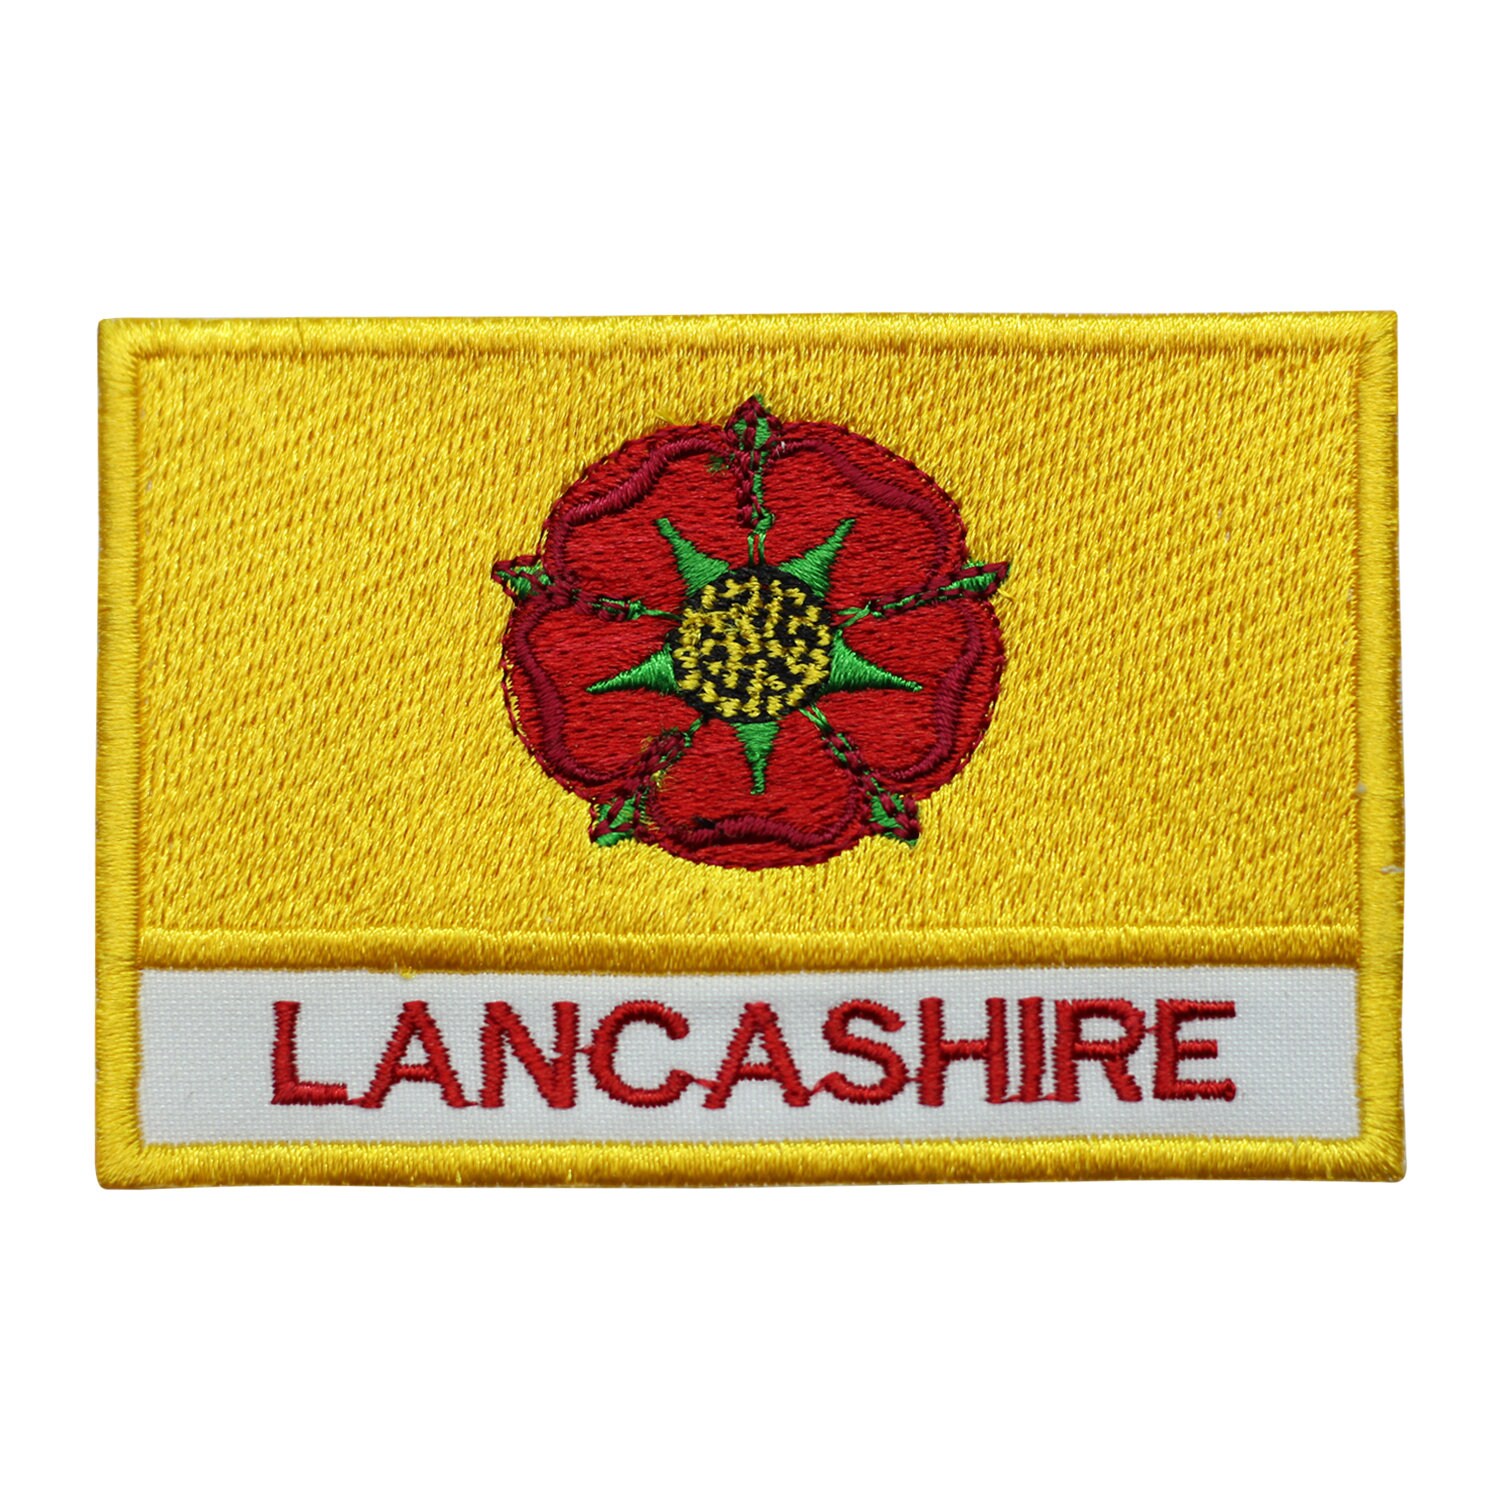 LANCASHIRE Flag Embroidered Iron On Sew On Patch Badge For Clothes Etc